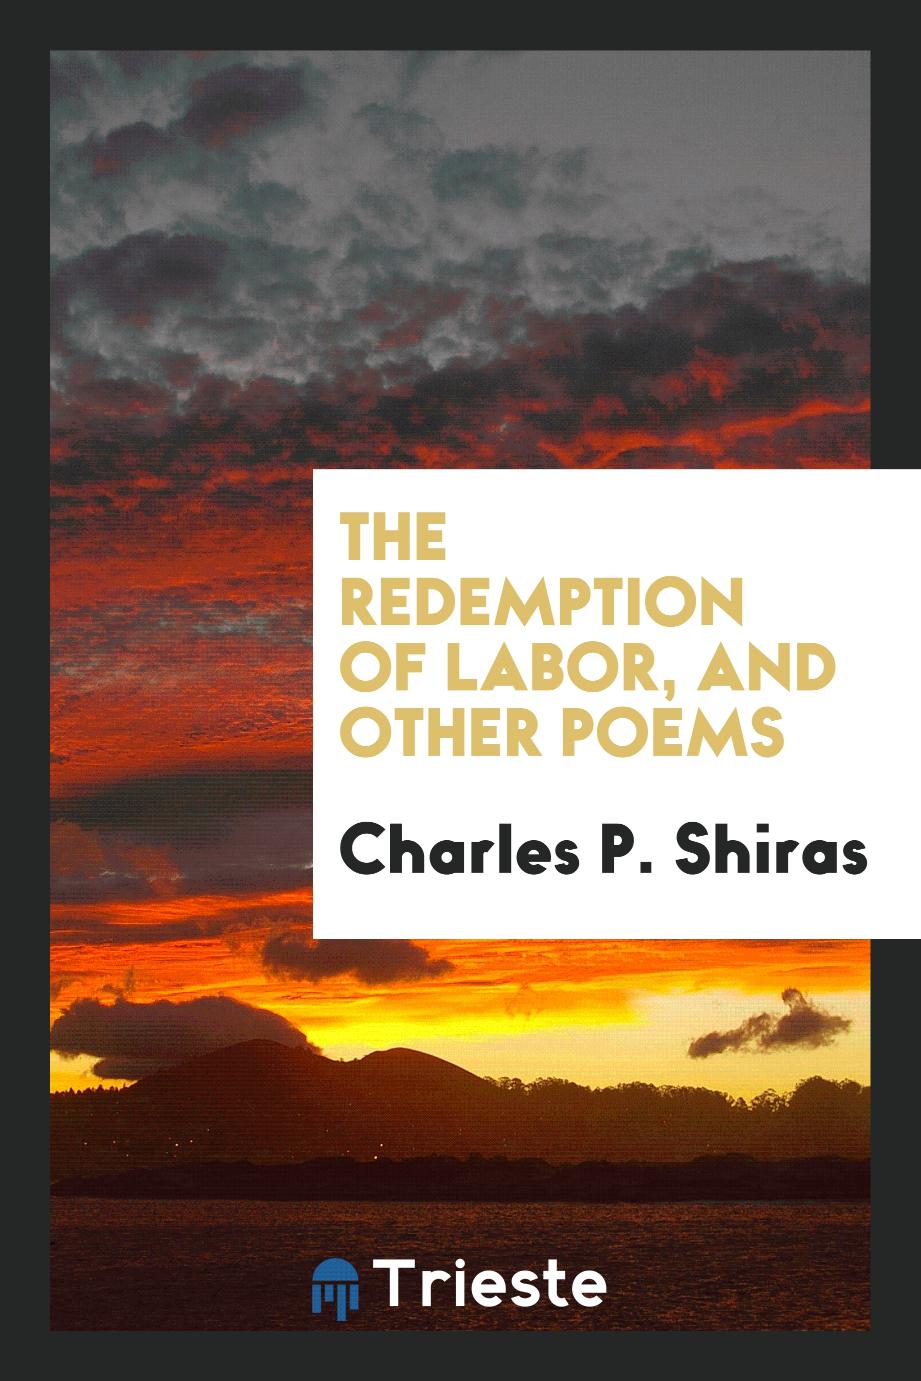 The Redemption of Labor, and Other Poems